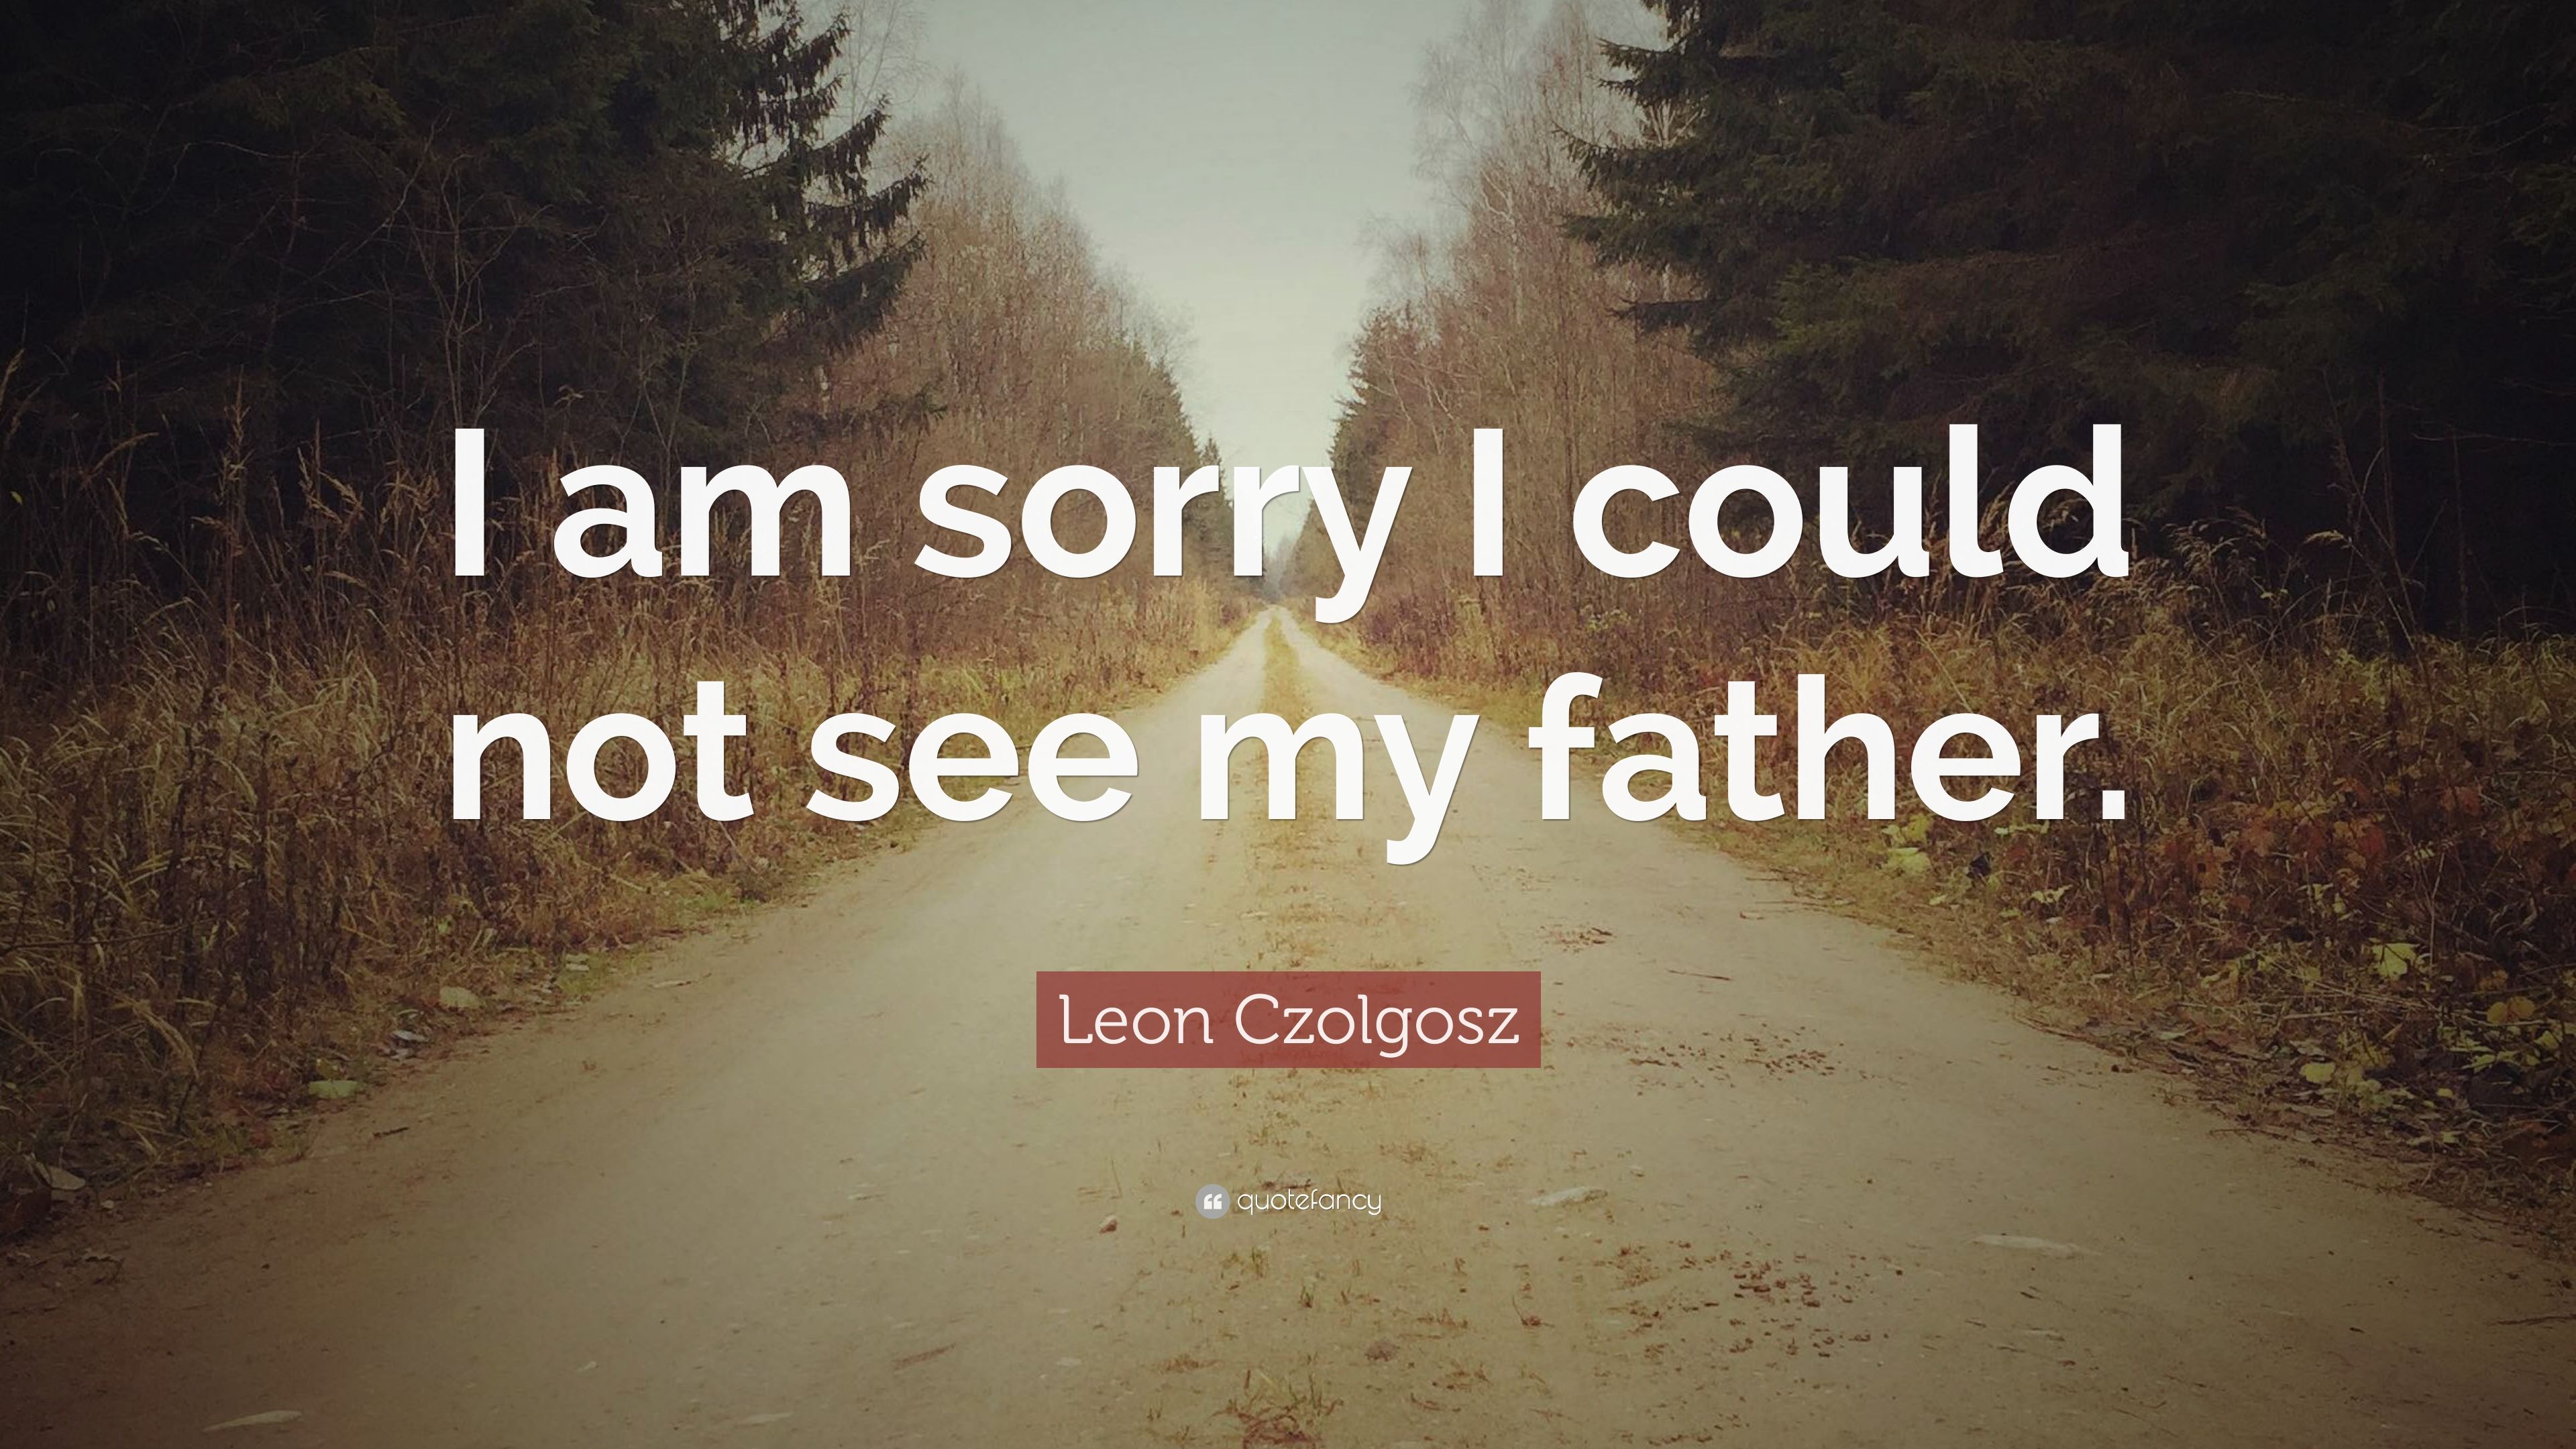 Leon Czolgosz Quote: “I am sorry I could not see my father.”